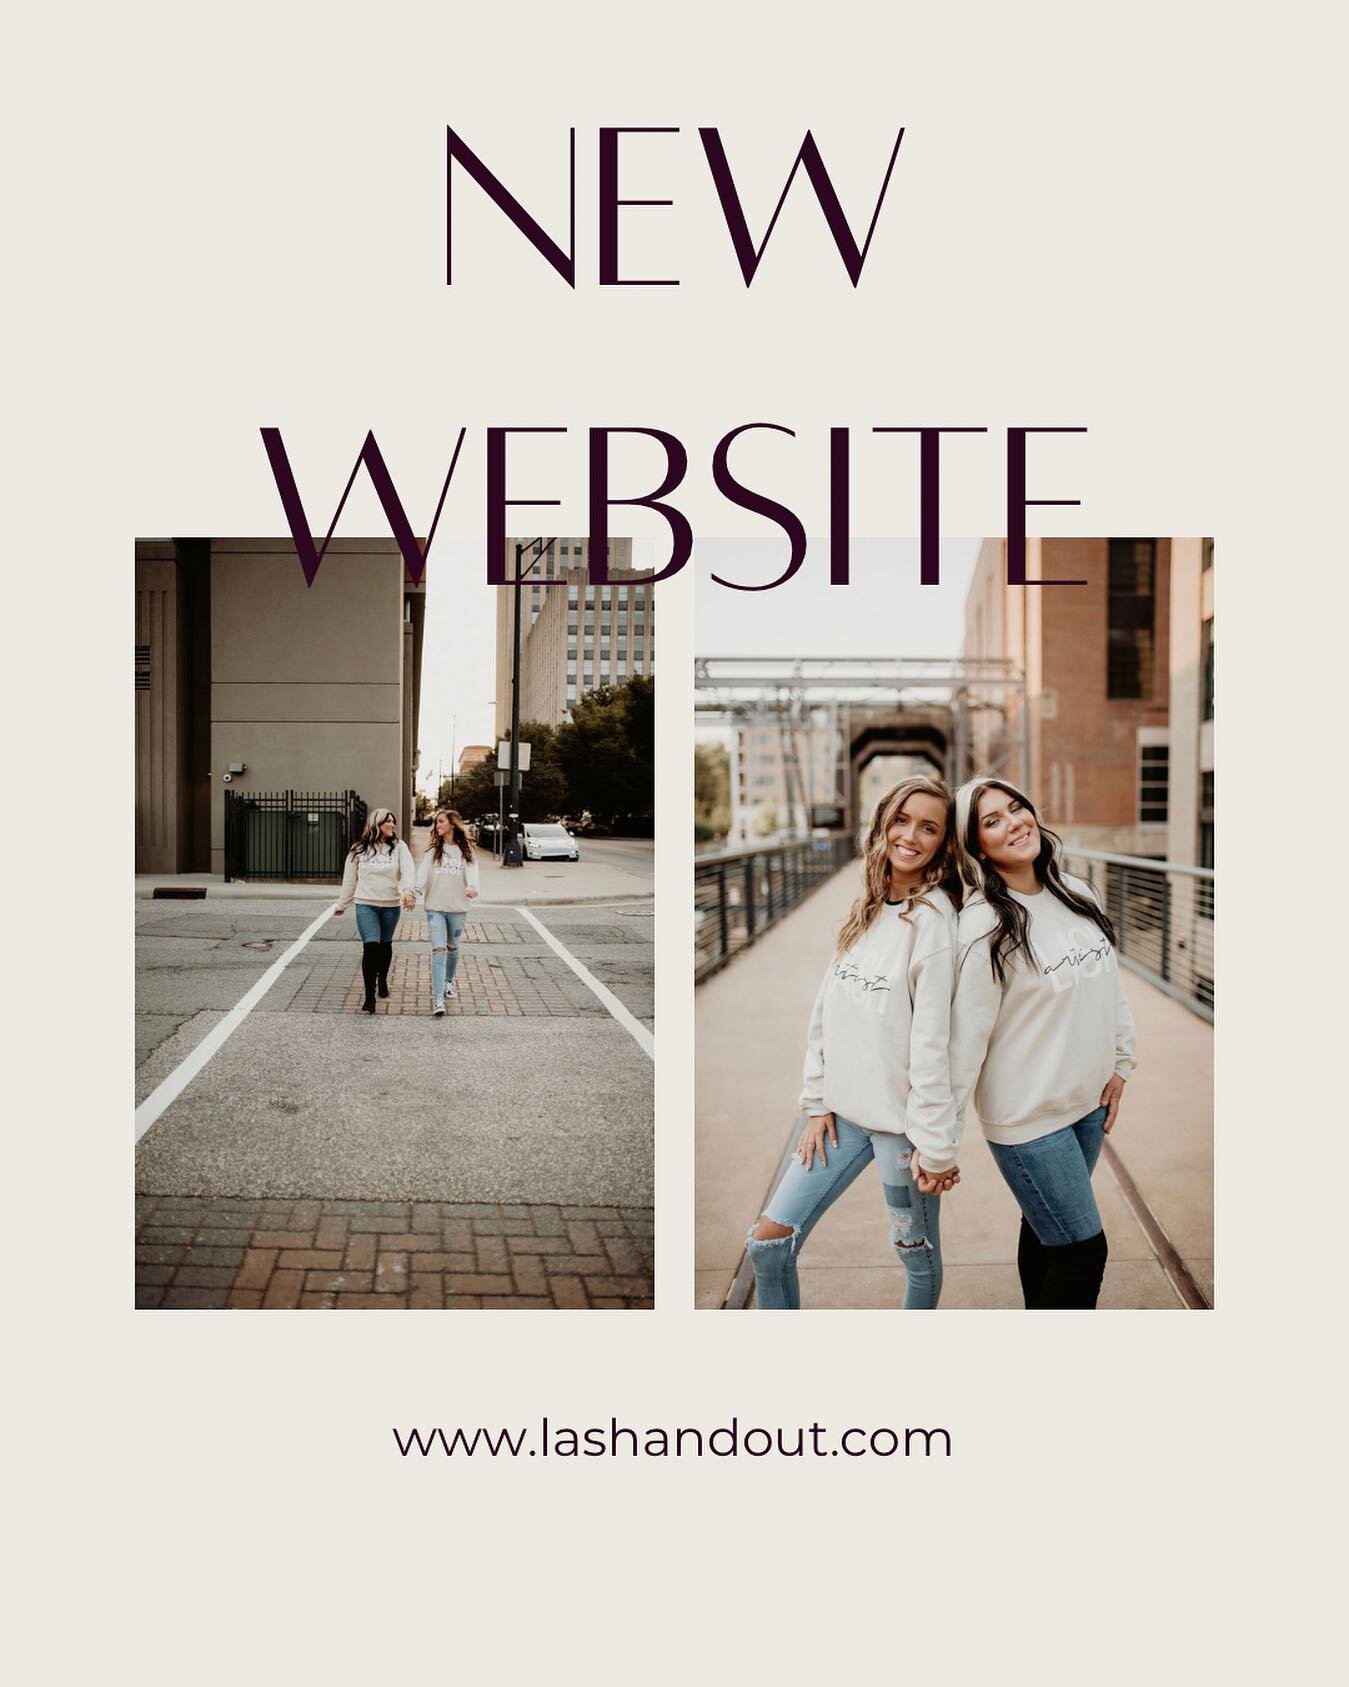 We our happy to announce our new site babes🤍
 
Credit to @beababe.shanna For putting her hard work into our site 🤍

#kernersvillelashes #browwaxing #browwax #fullness #lashqueen #lashartist
#oakridgelashes #lashandout #beforeandafter #winstonsaleml